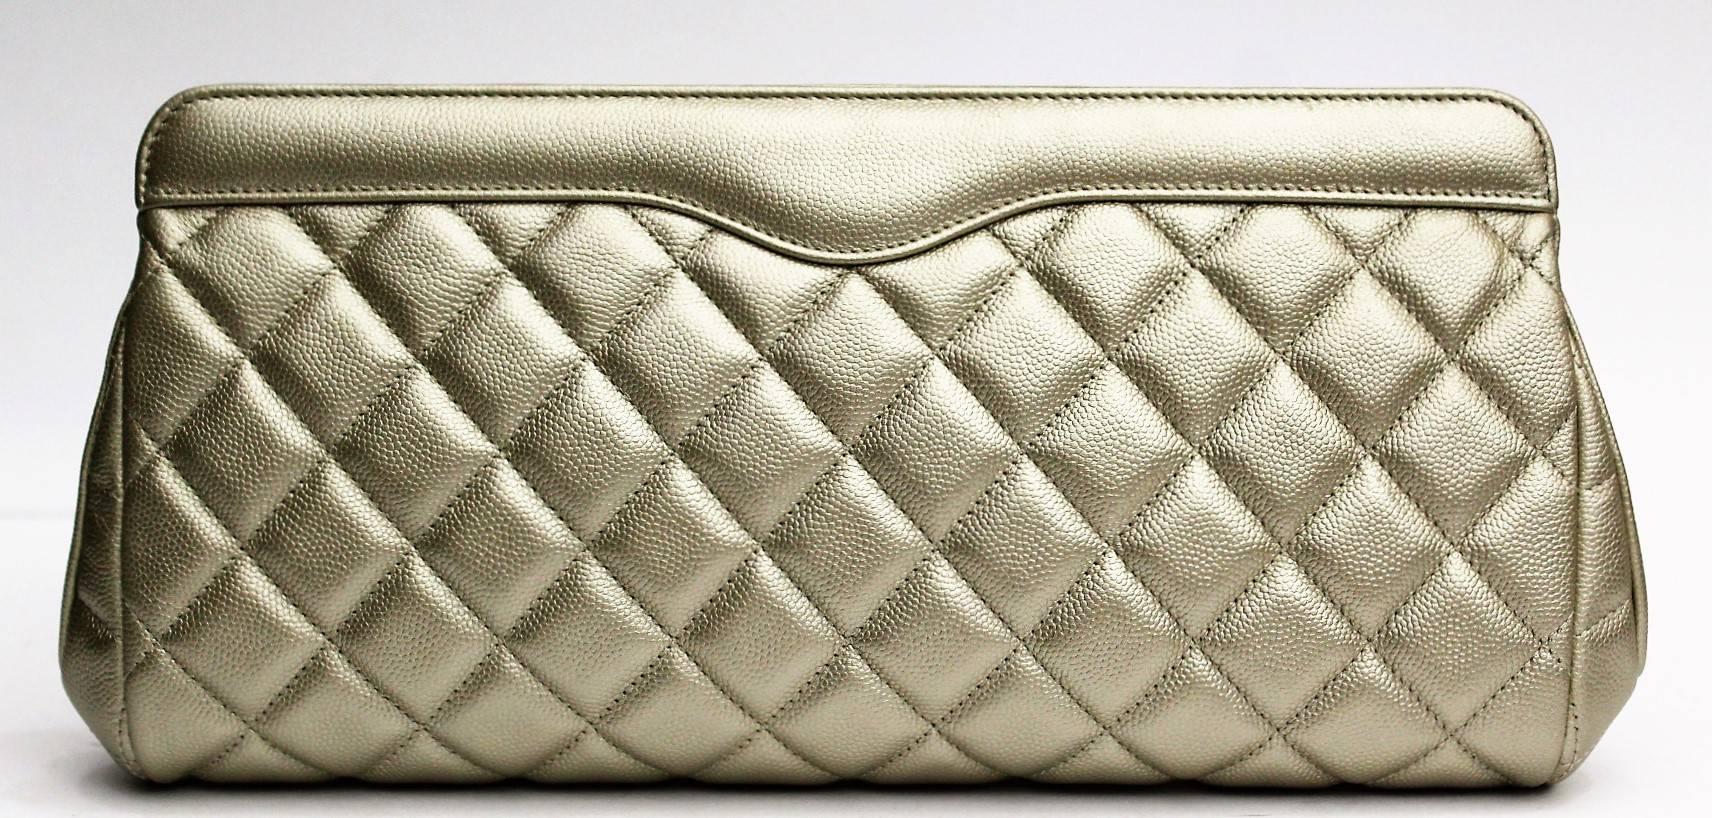 Chanel envelope clutch from Fall/winter 2016 collection!  Beautiful the champagne gold colour with light Ghw and best thing is its caviar leather. Good condition. We have dustbag, box and card.